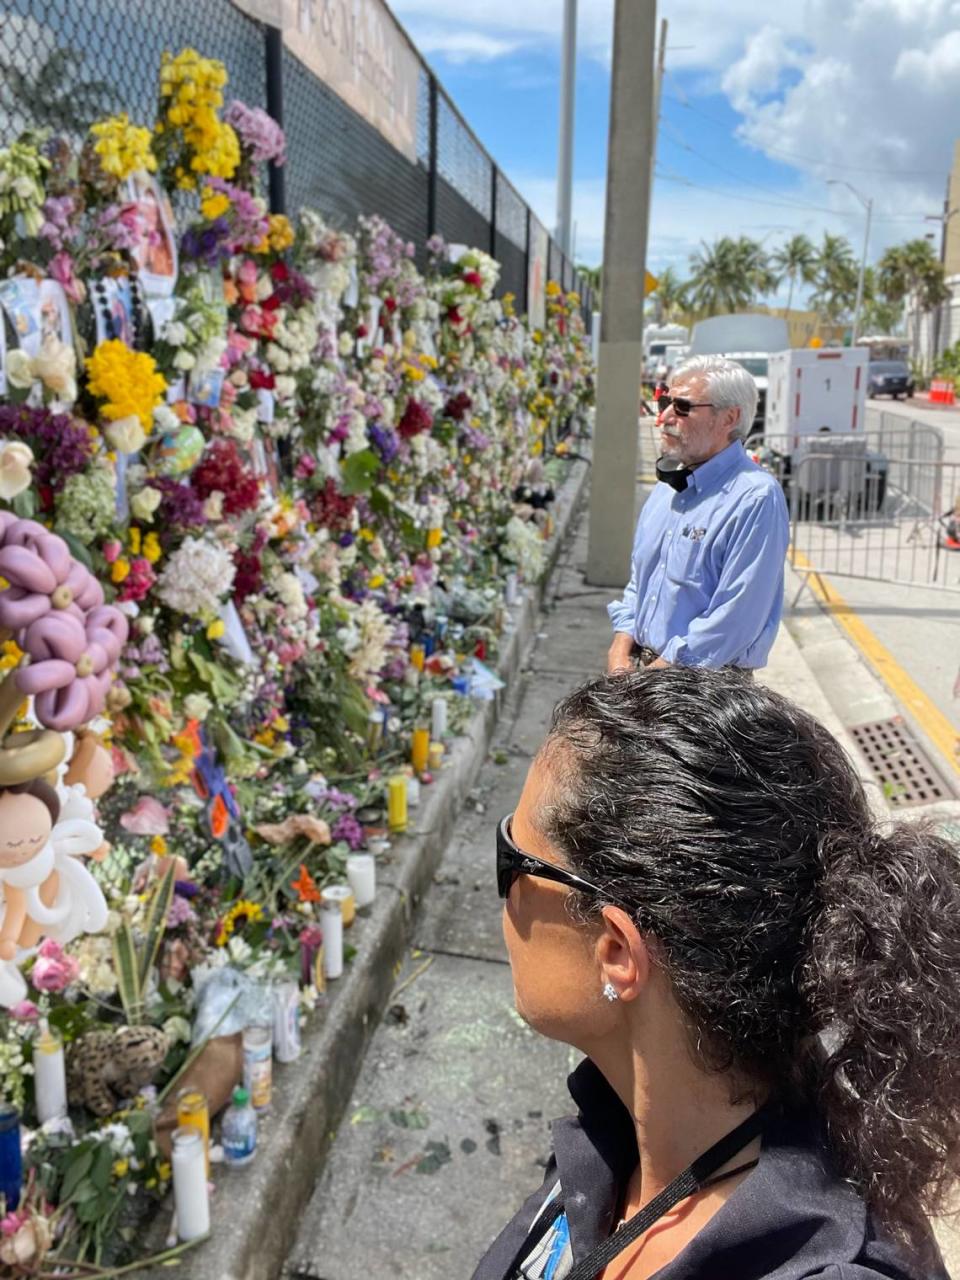 Greater Miami Jewish Federation President & CEO Jacob Solomon, in background, and the federation’s Stephanie Viegas visit the memorial for the 98 people who died during the partial collapse of the Champlain Towers South condo tower in Surfside on June 24, 2021.